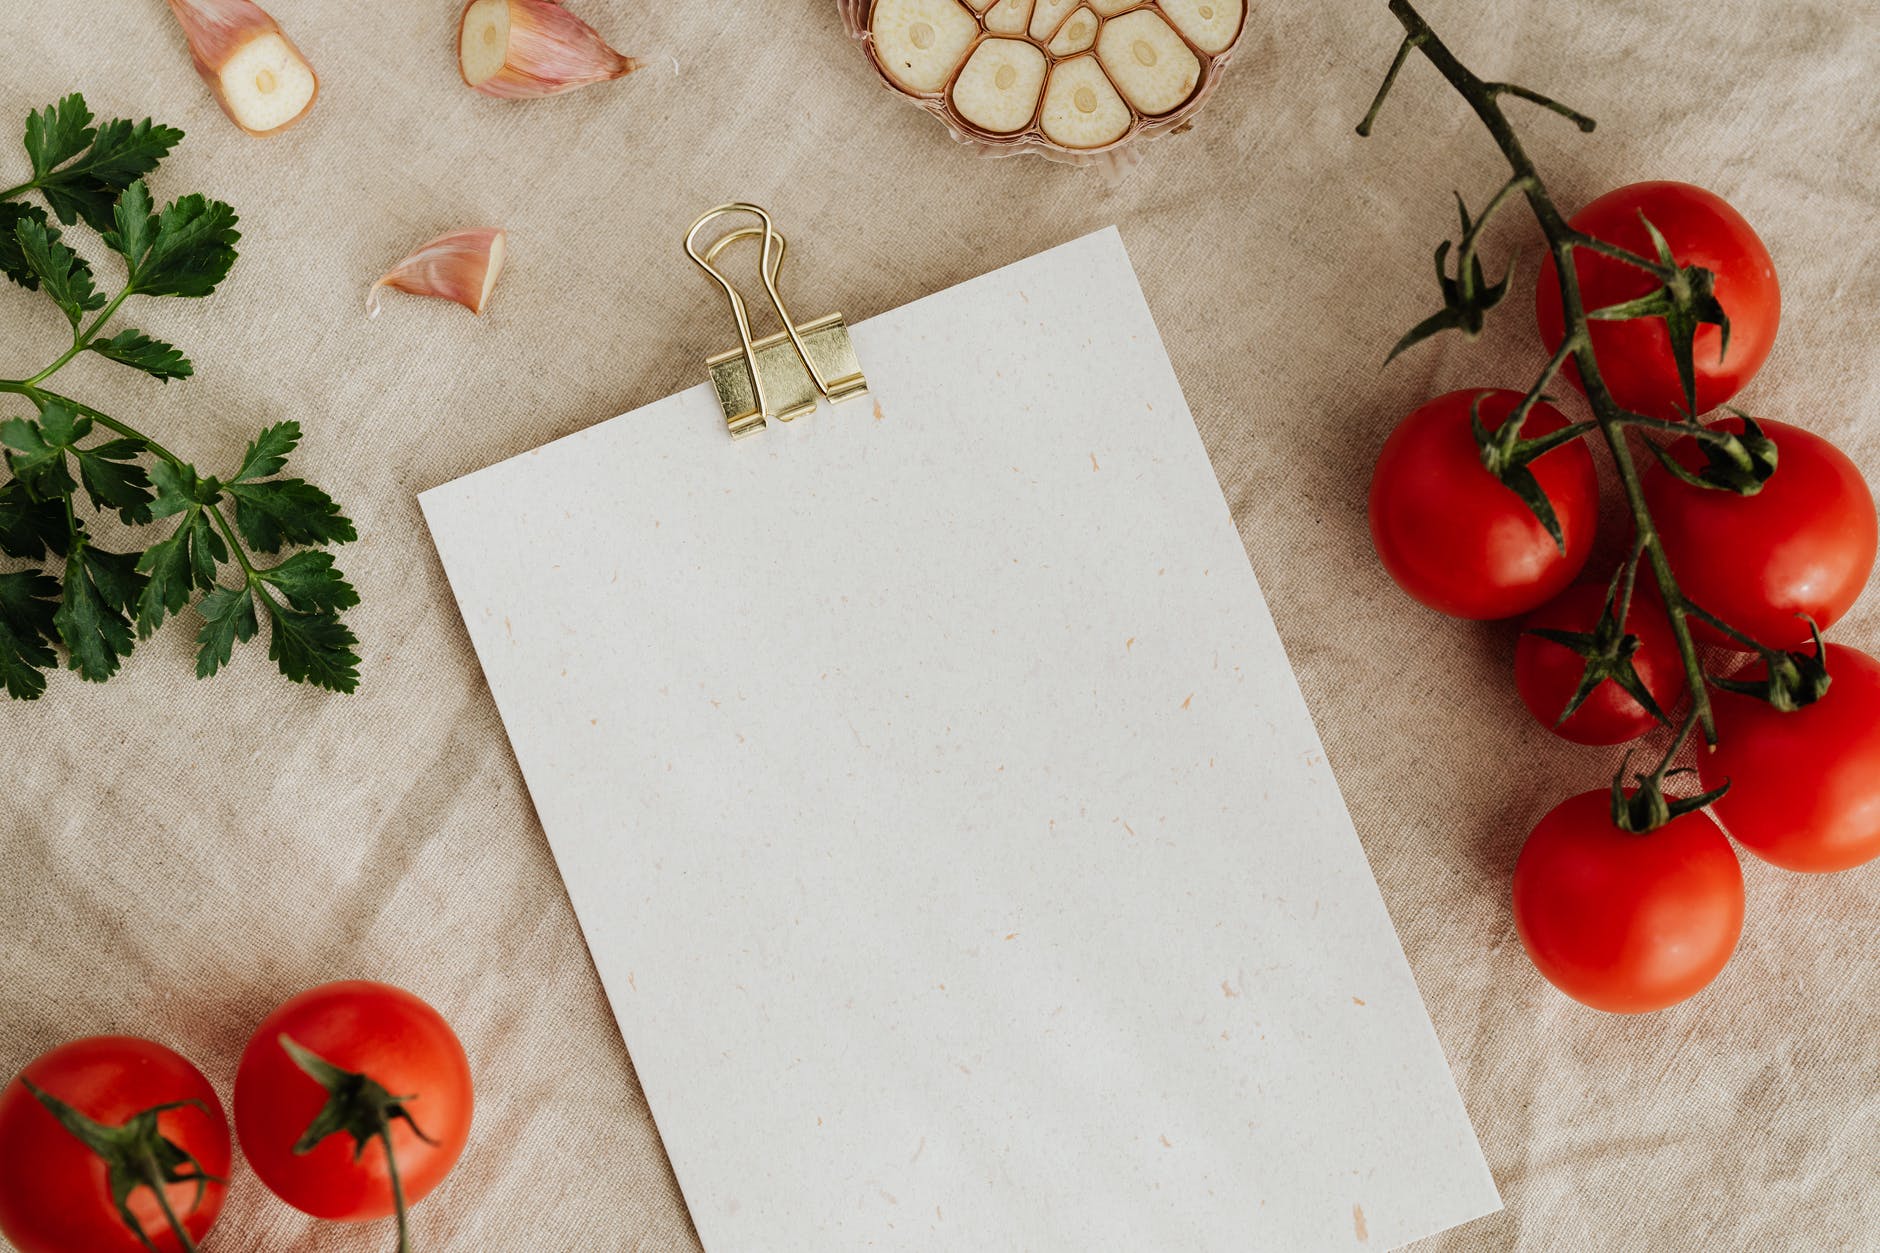 empty clipboard with fresh vegetables and herbs on table